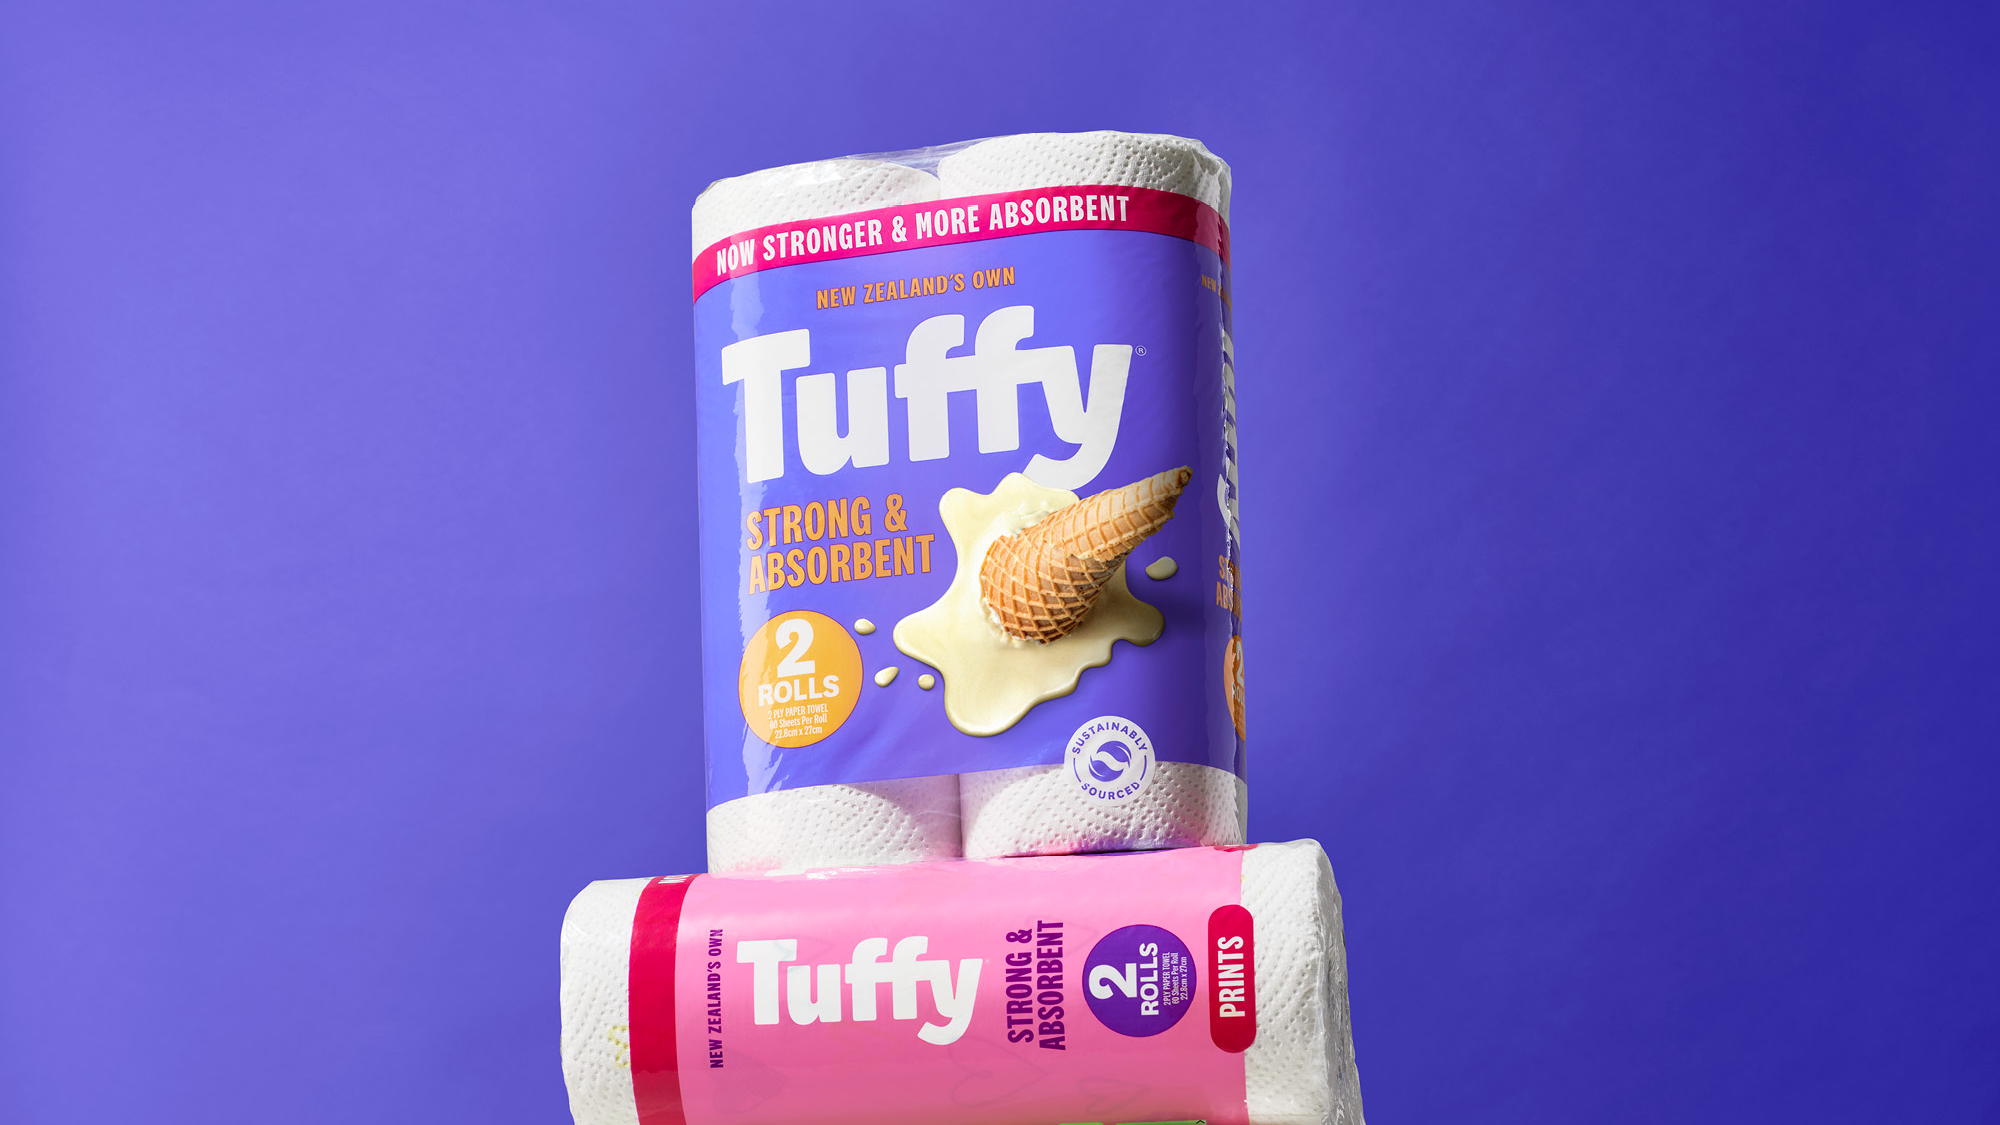 Tuffy Towels Breaks Away From Bland Utilitarian Design Systems